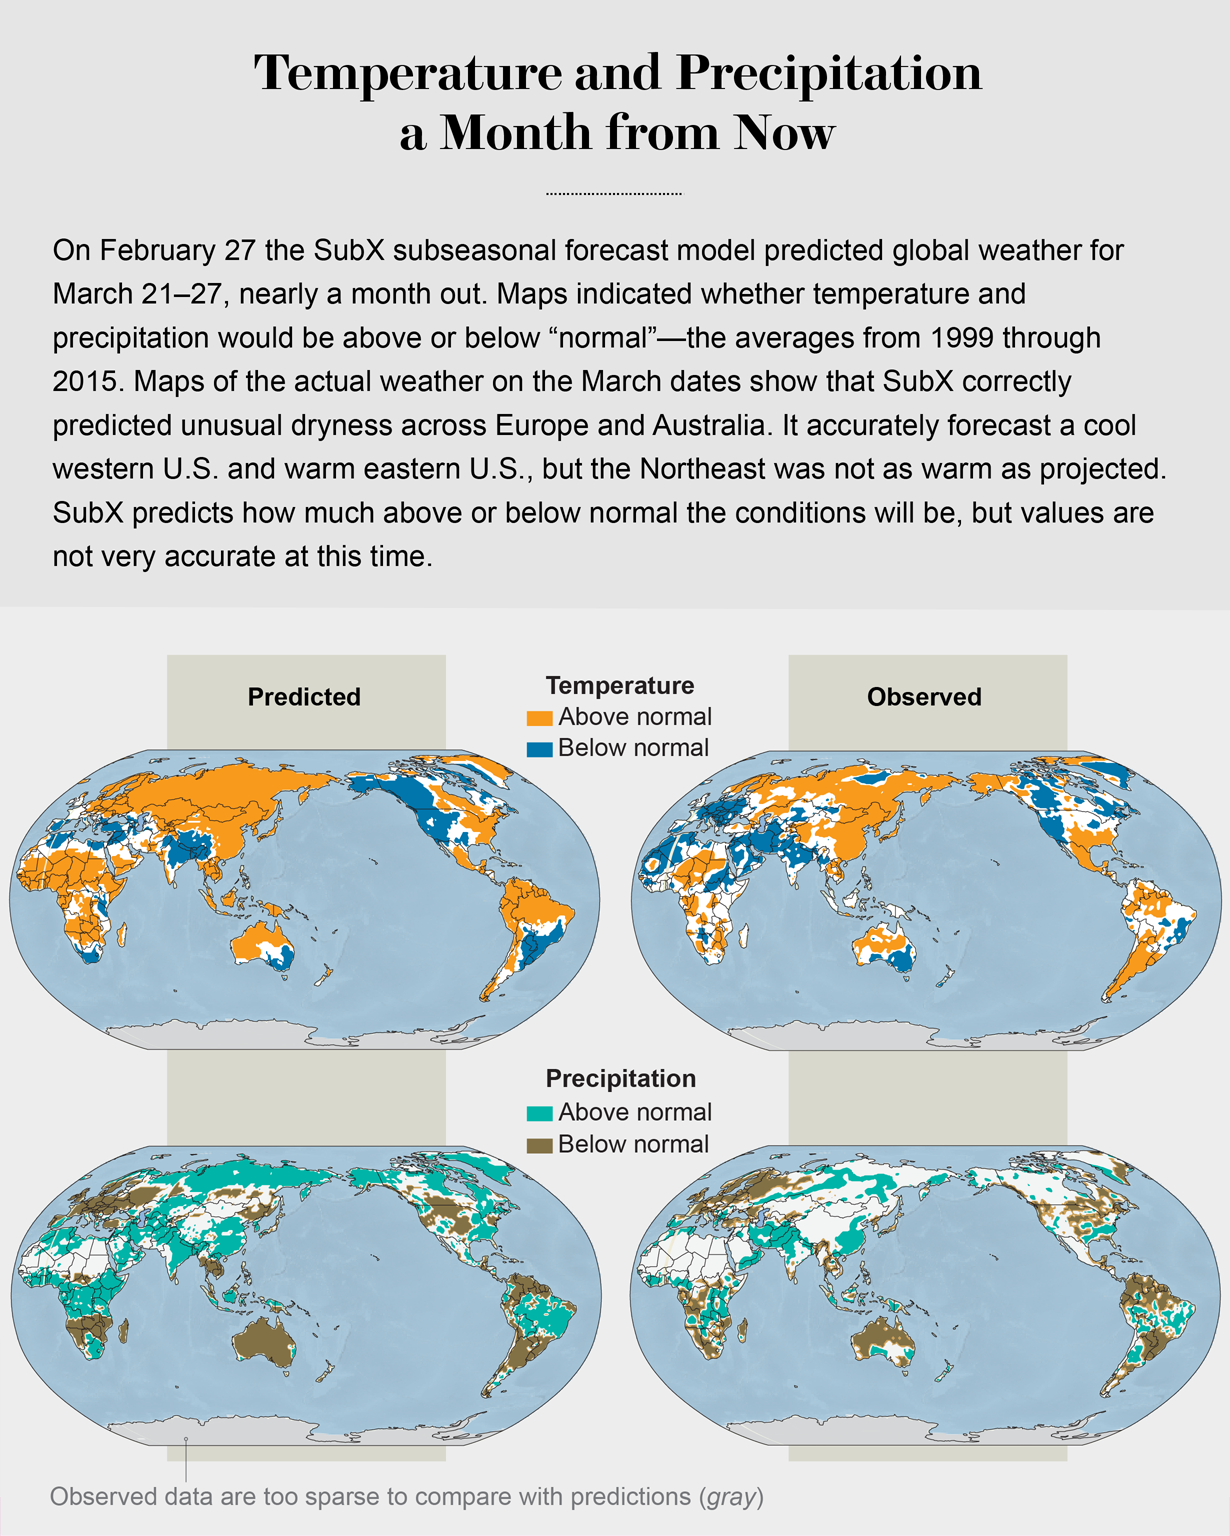 SubX subseasonal forecast model predictions versus observed temperatures and precipitation worldwide for March 21–27